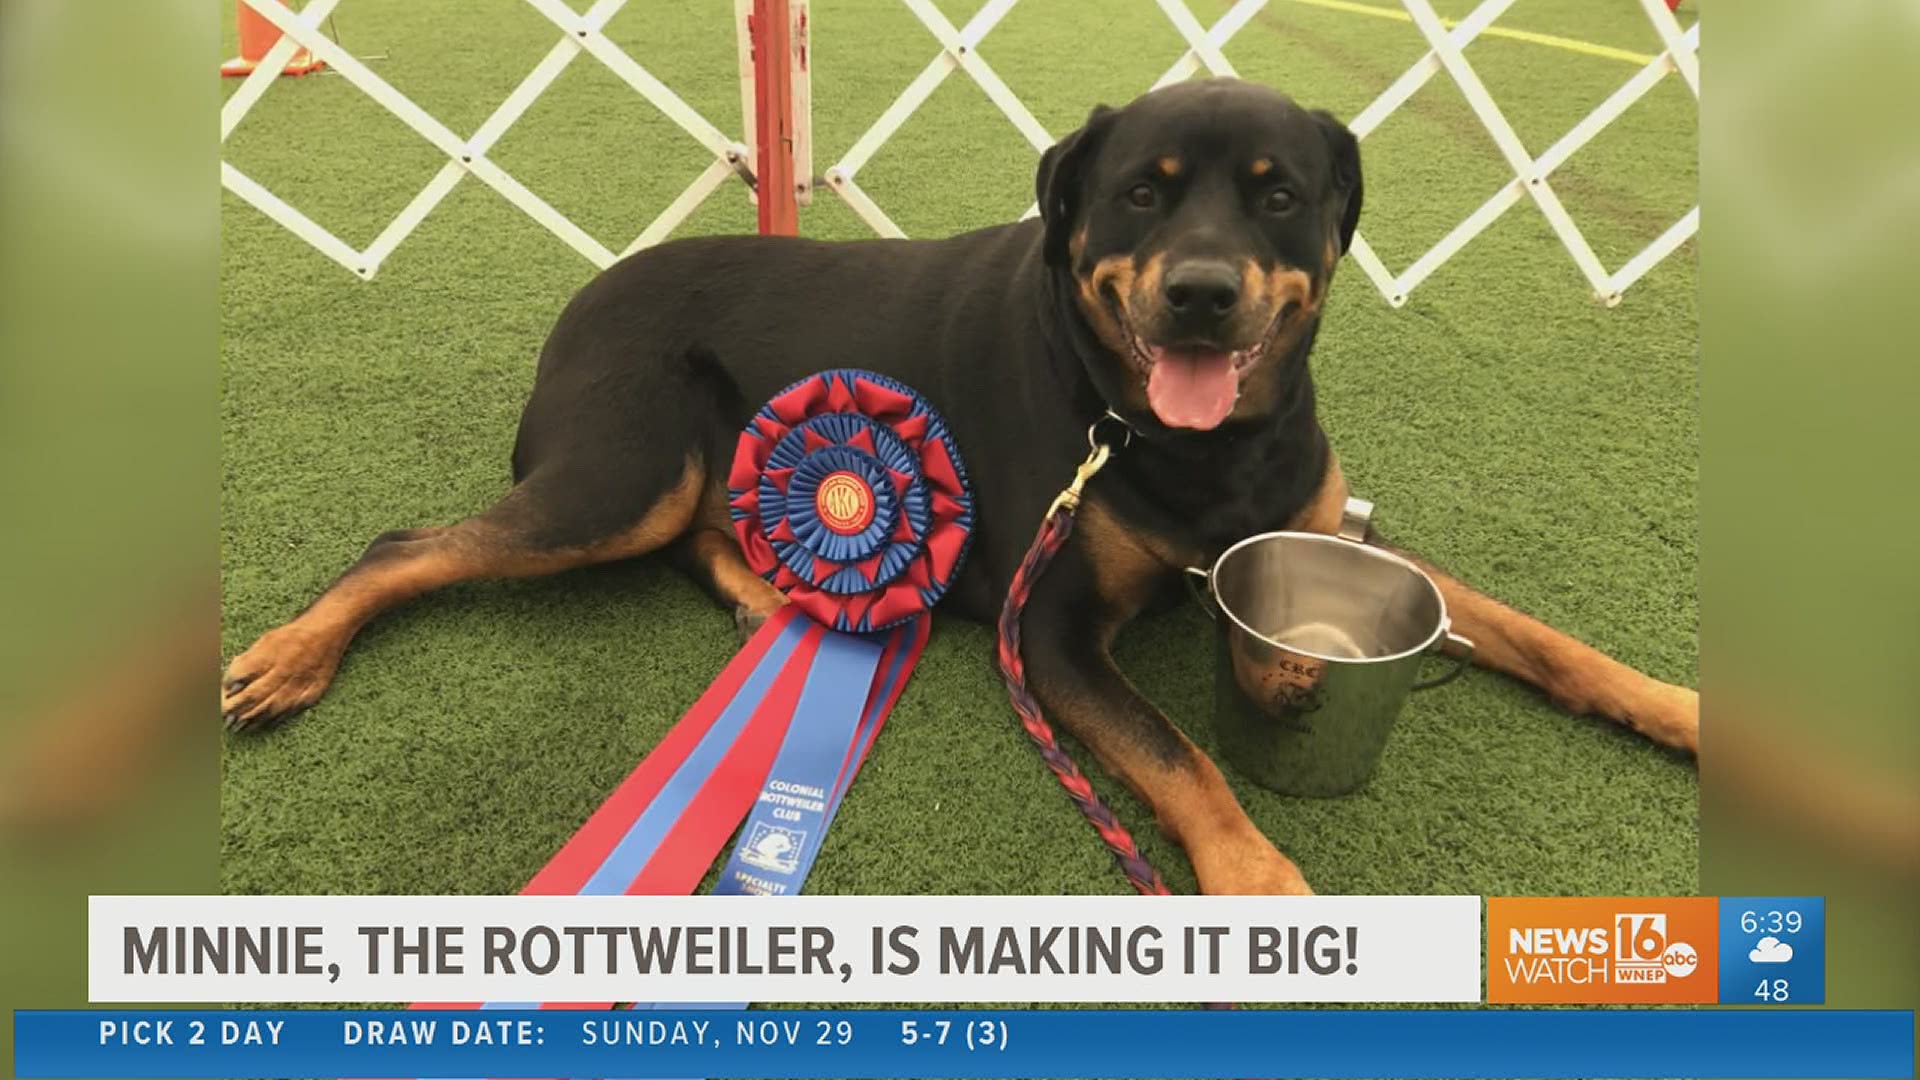 Meet the pooch from our area getting ready to strut her stuff on a national stage.